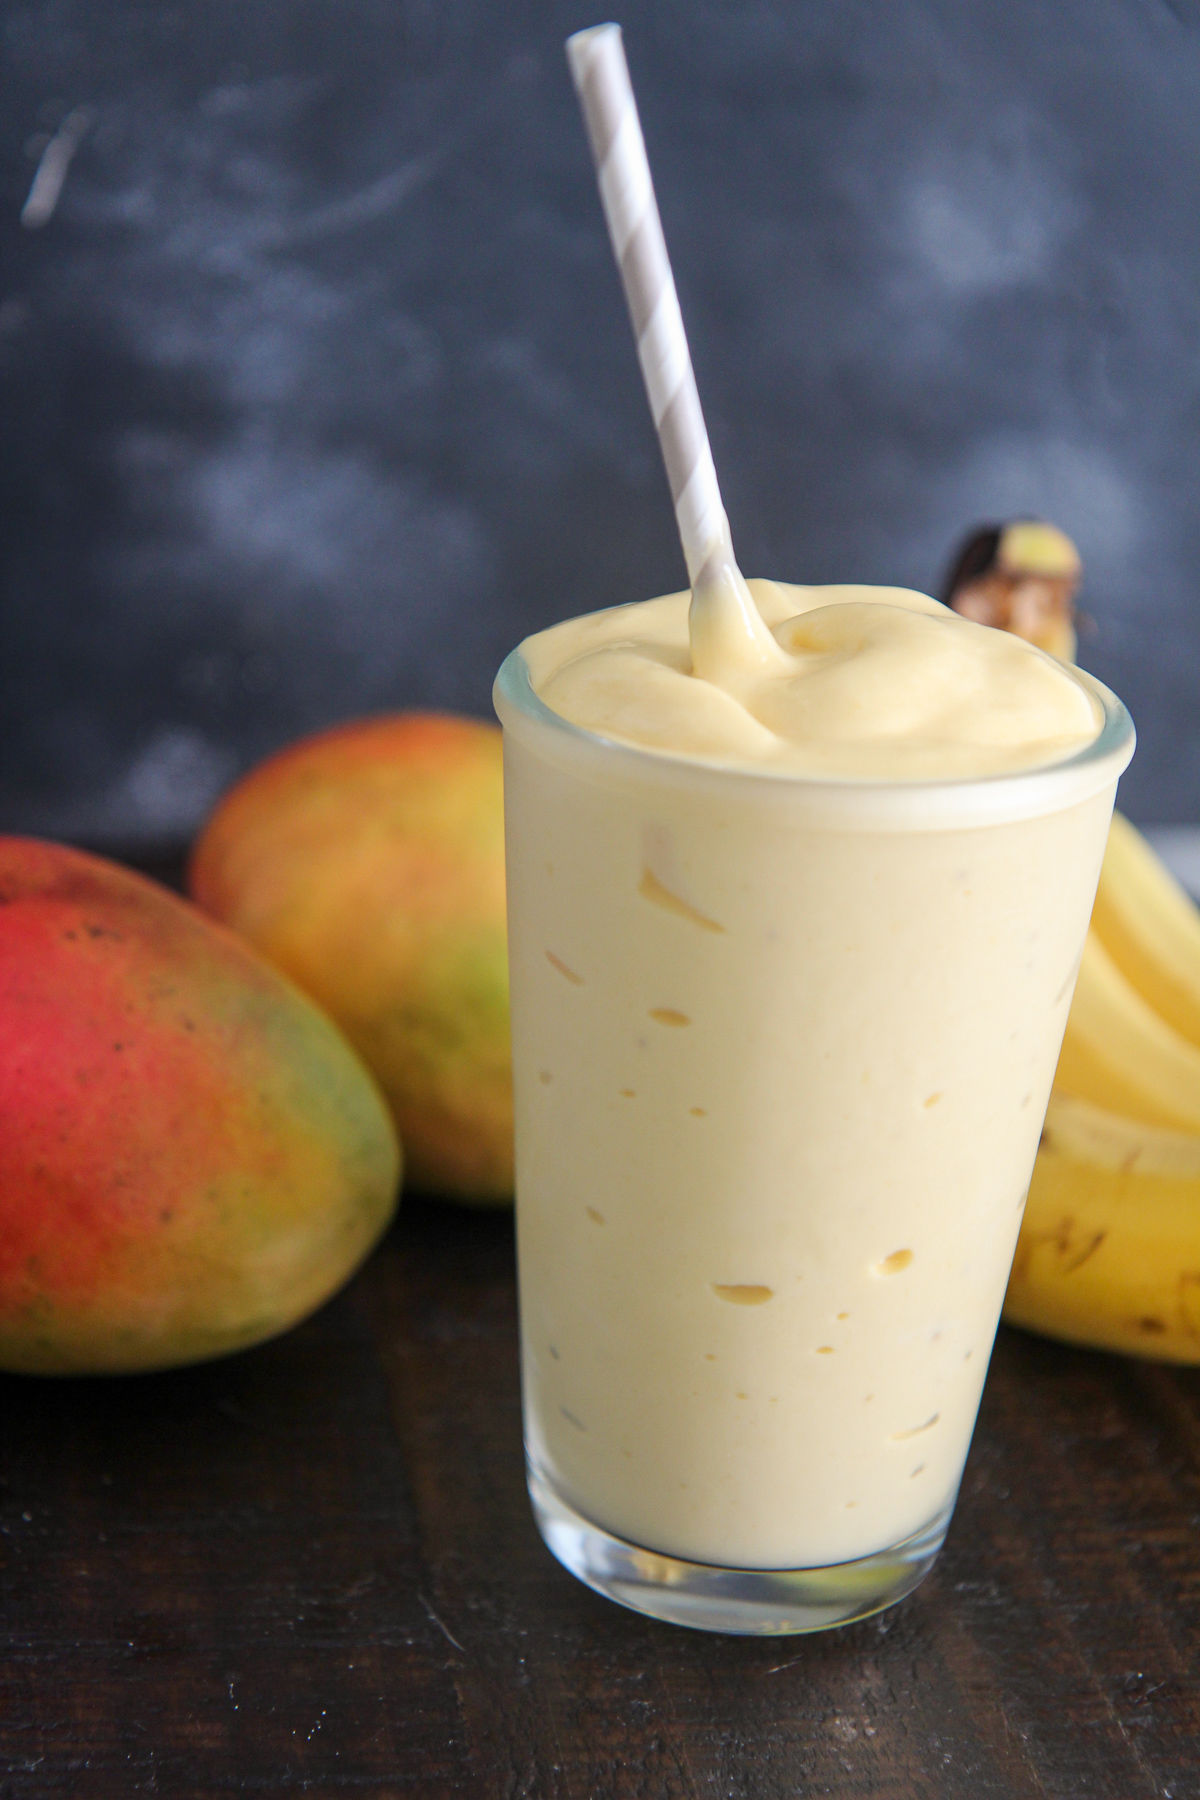 mango smoothie in a glass with a straw and fruits in the background